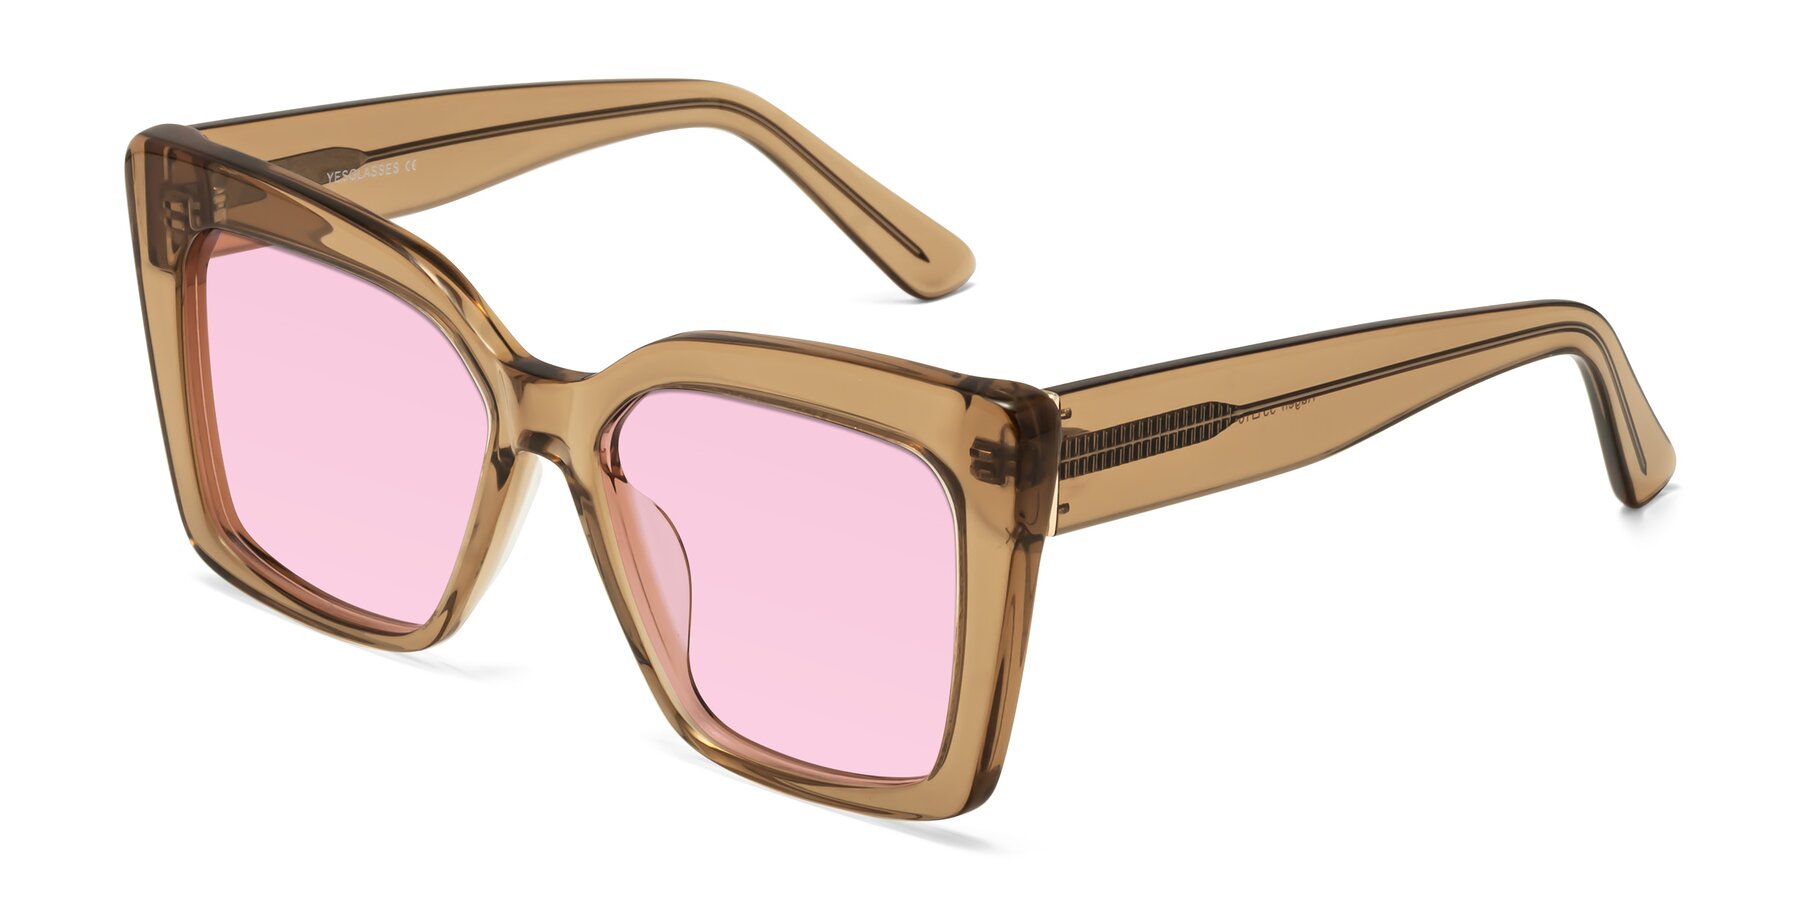 Angle of Hagen in Translucent Brown with Light Pink Tinted Lenses